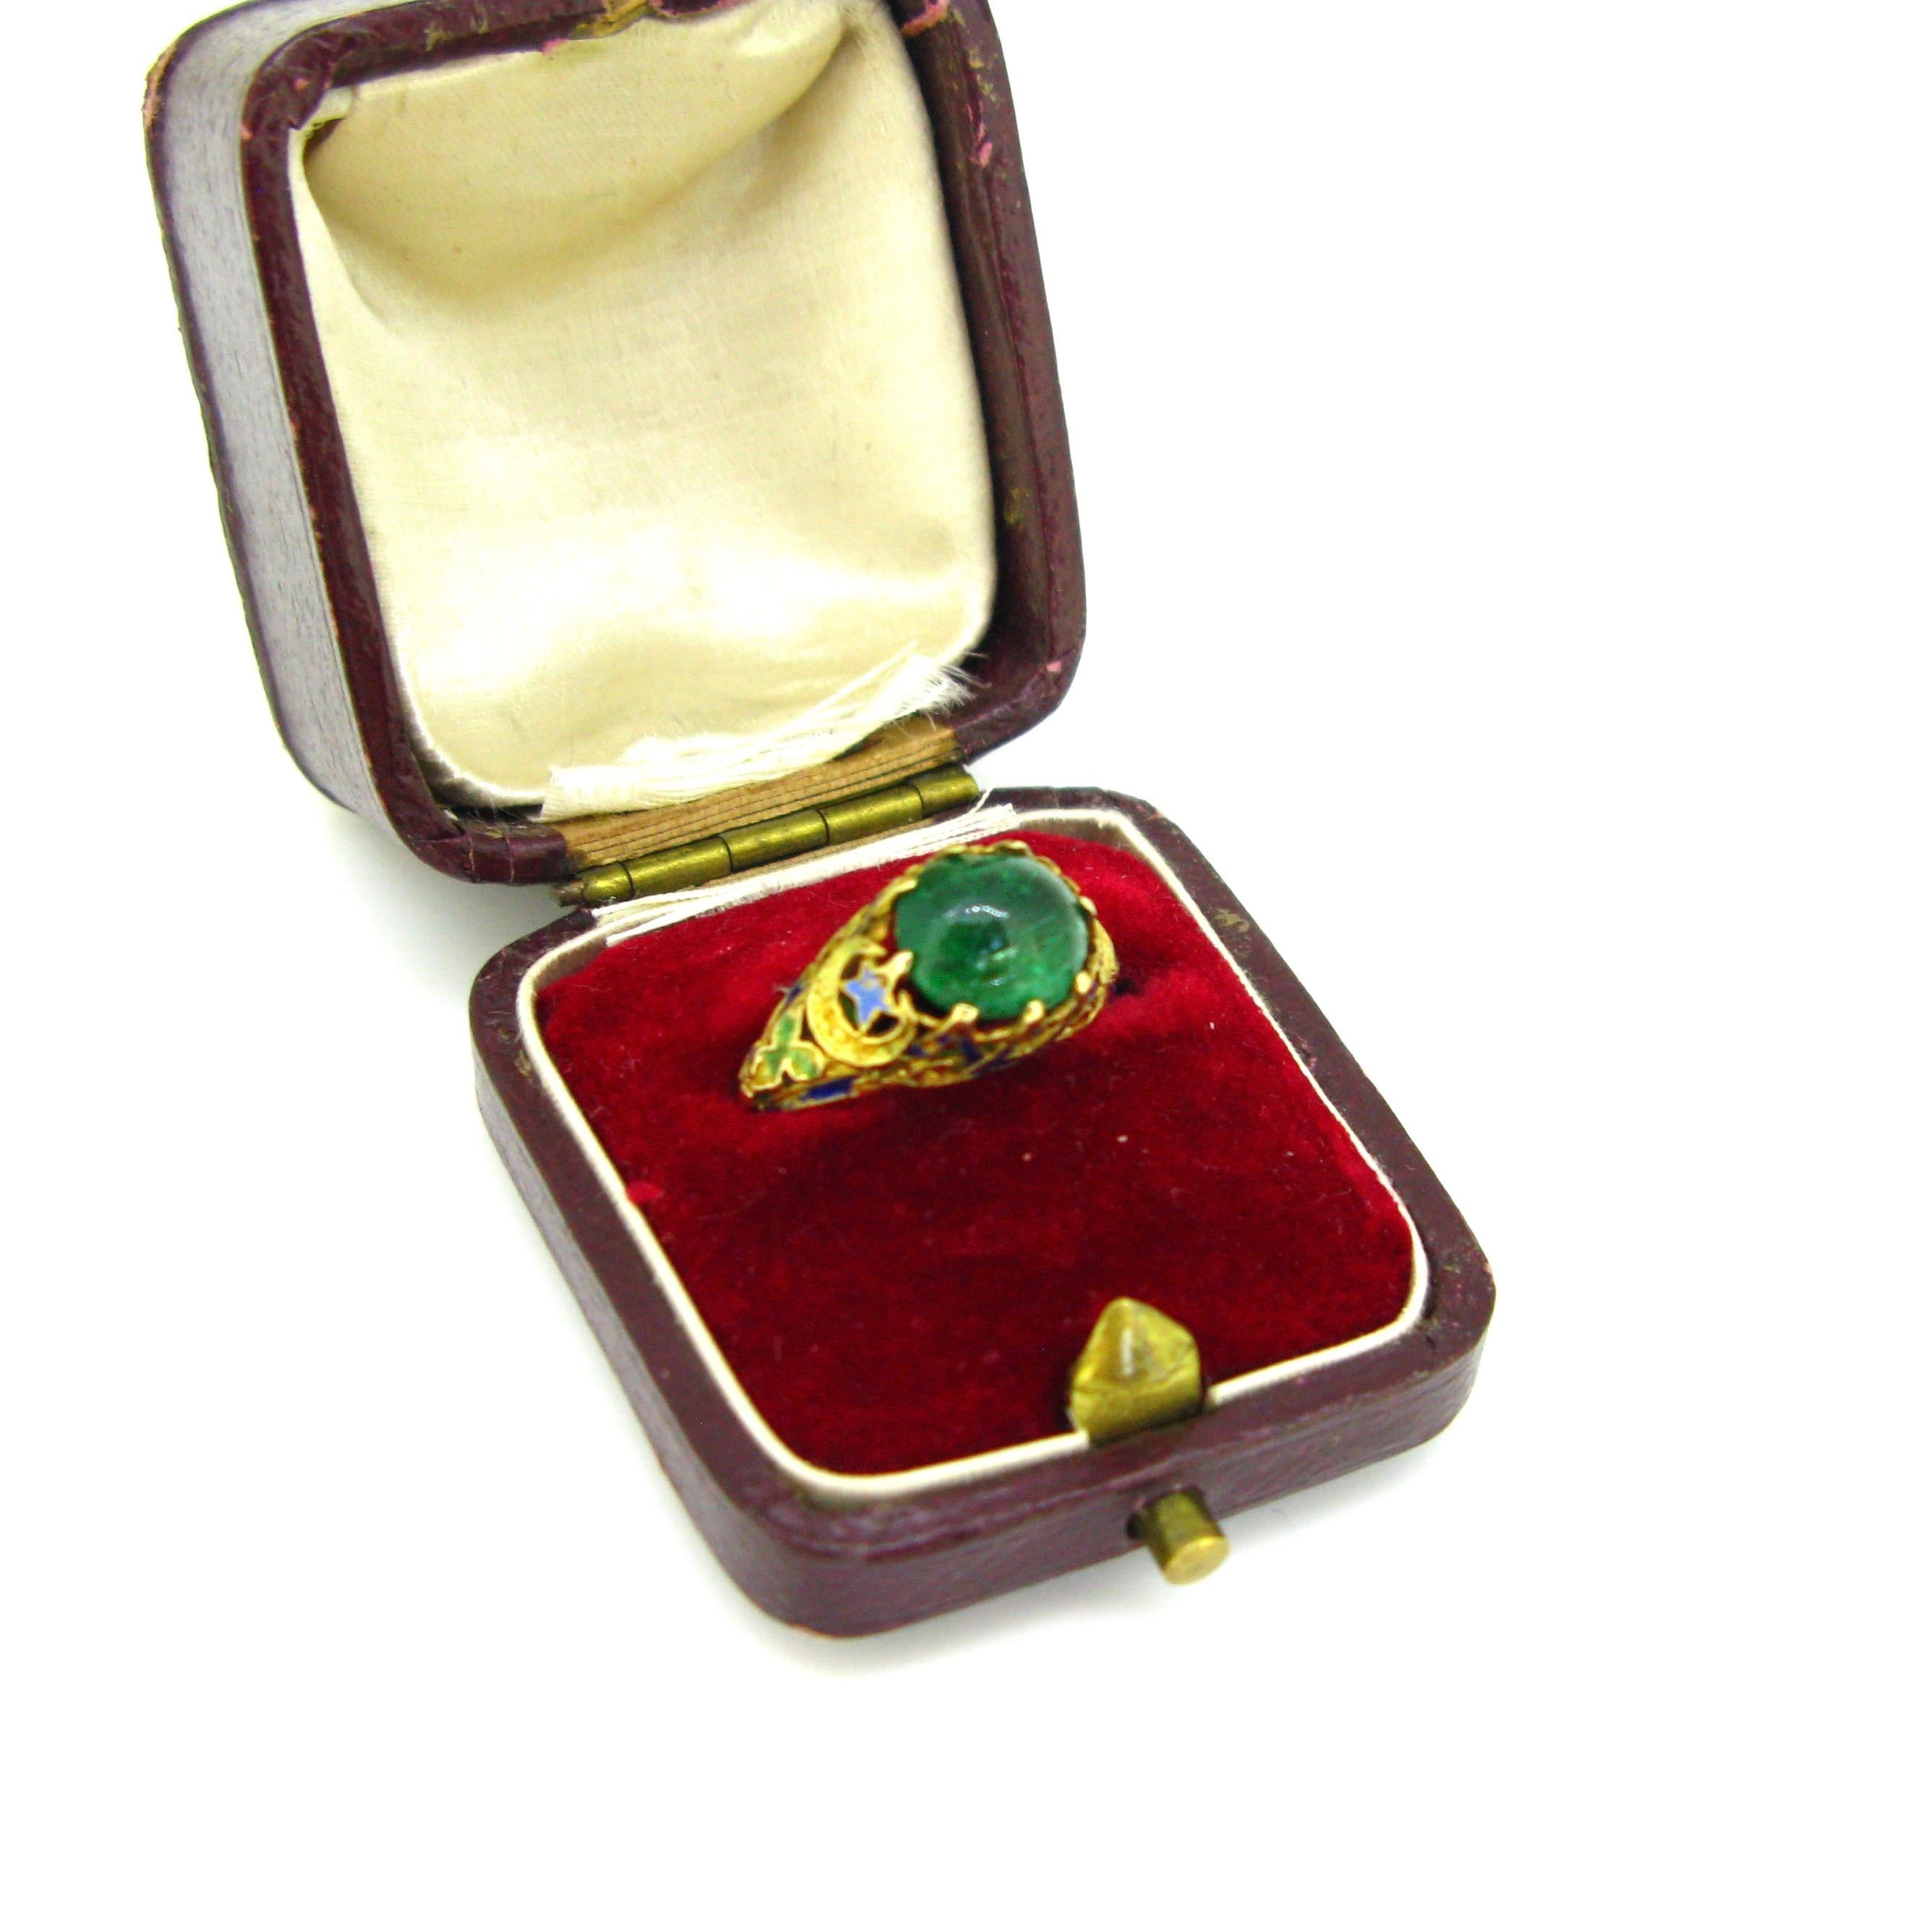 This lovely ring comes directly from the Victorian era. It is made in 14kt yellow gold. It has been adorned with enamel and set with a cabochon cut emerald weighing around 3ct. The precious stone presents few traces of wears and there are some